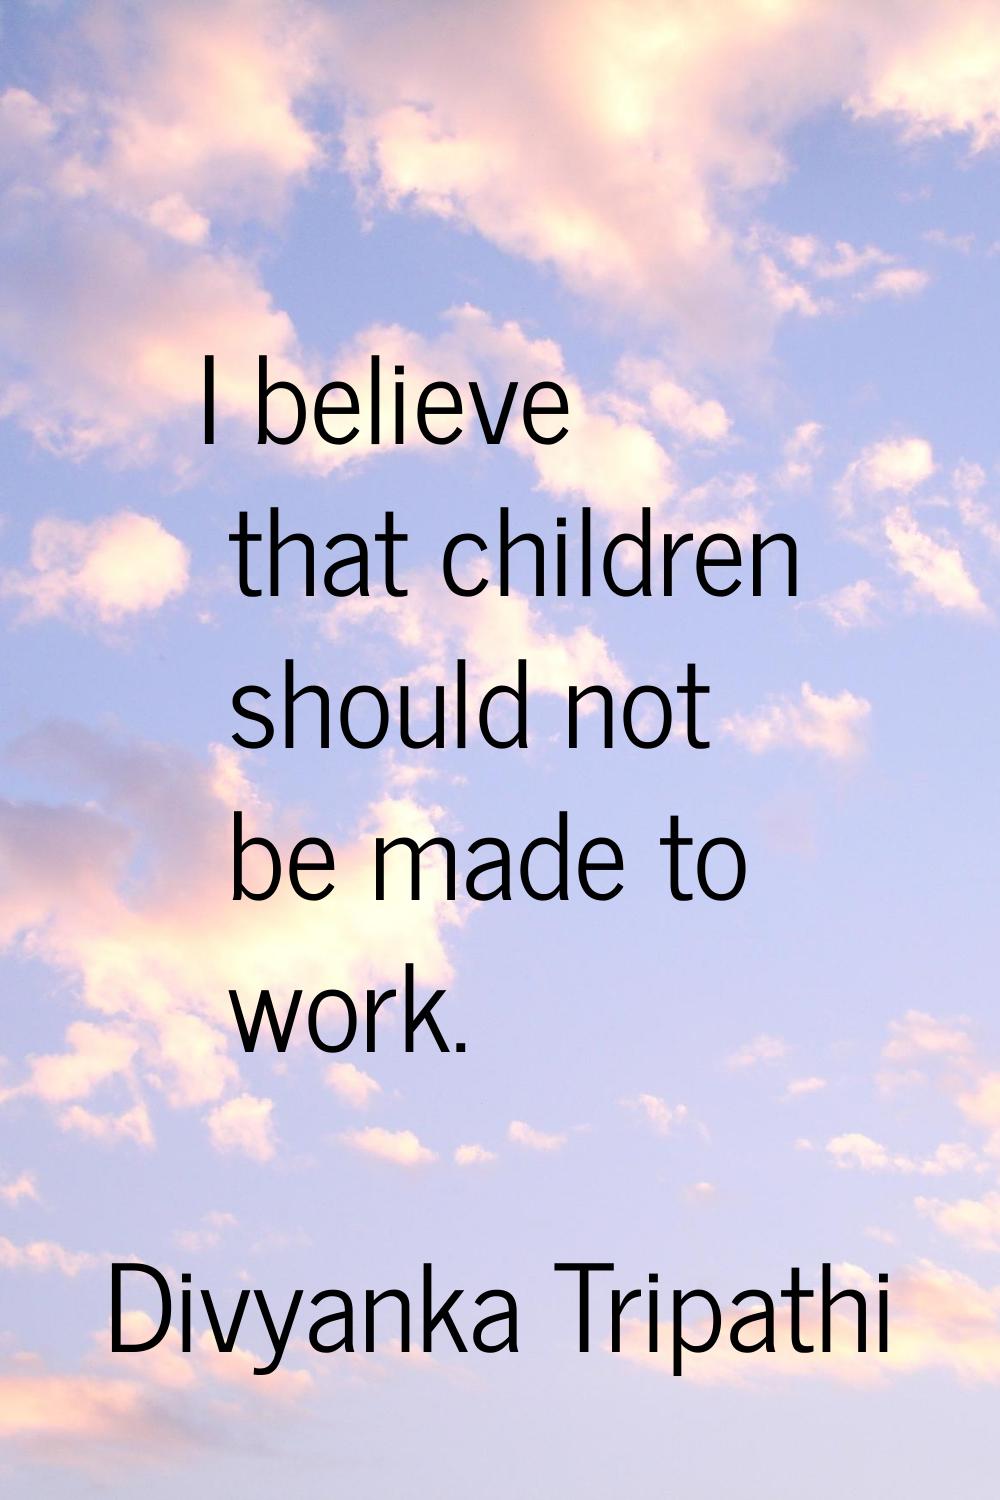 I believe that children should not be made to work.